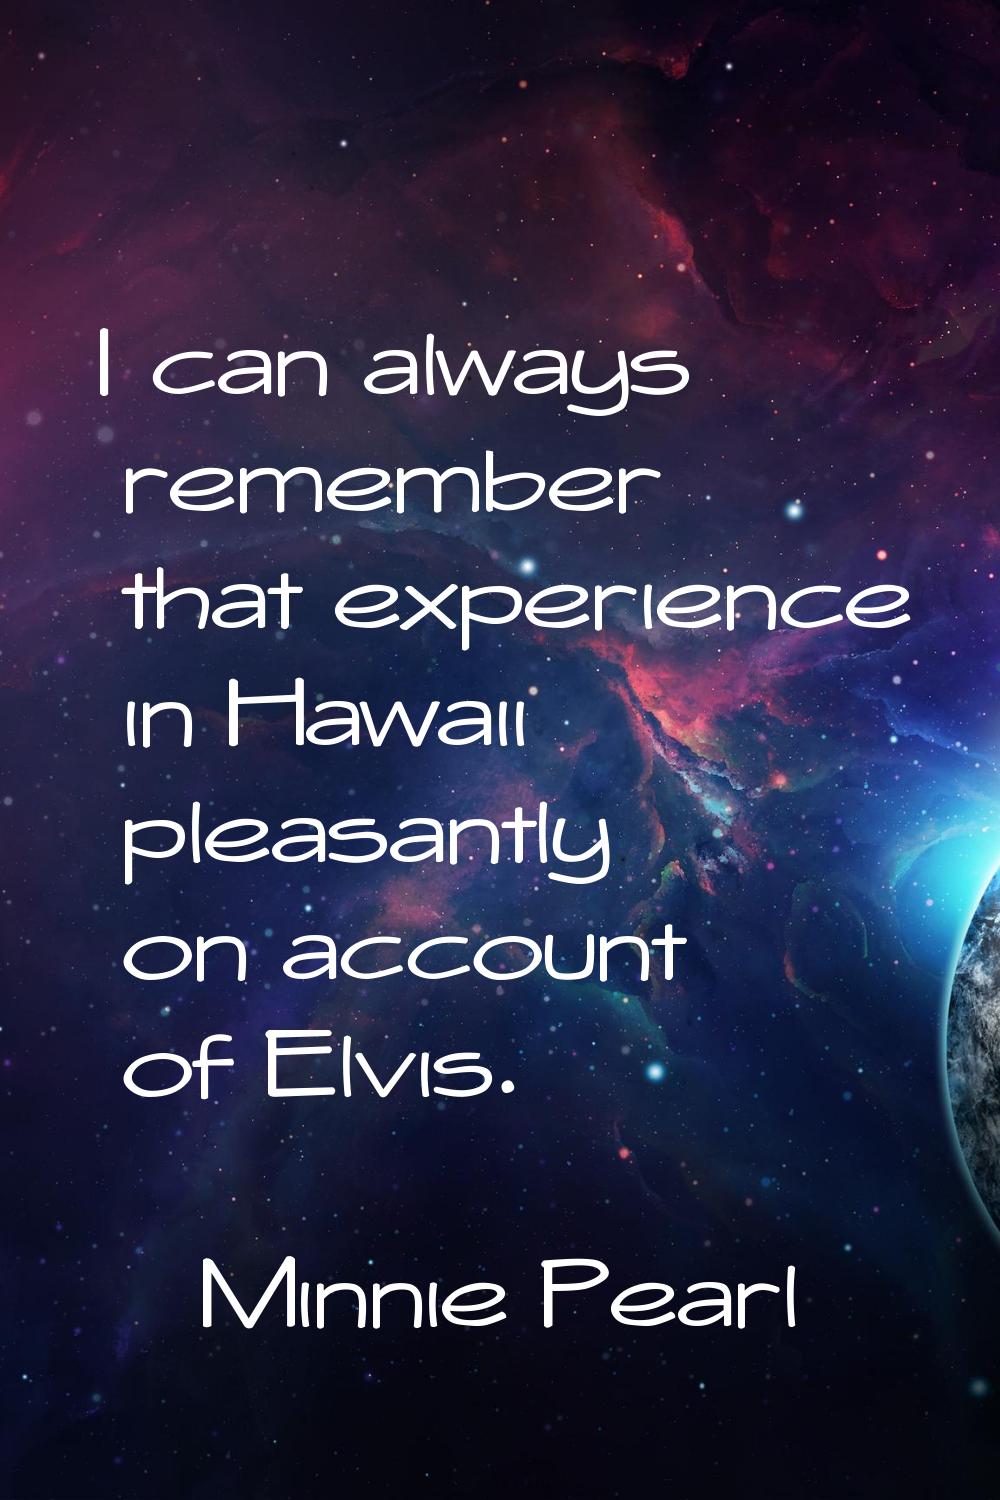 I can always remember that experience in Hawaii pleasantly on account of Elvis.